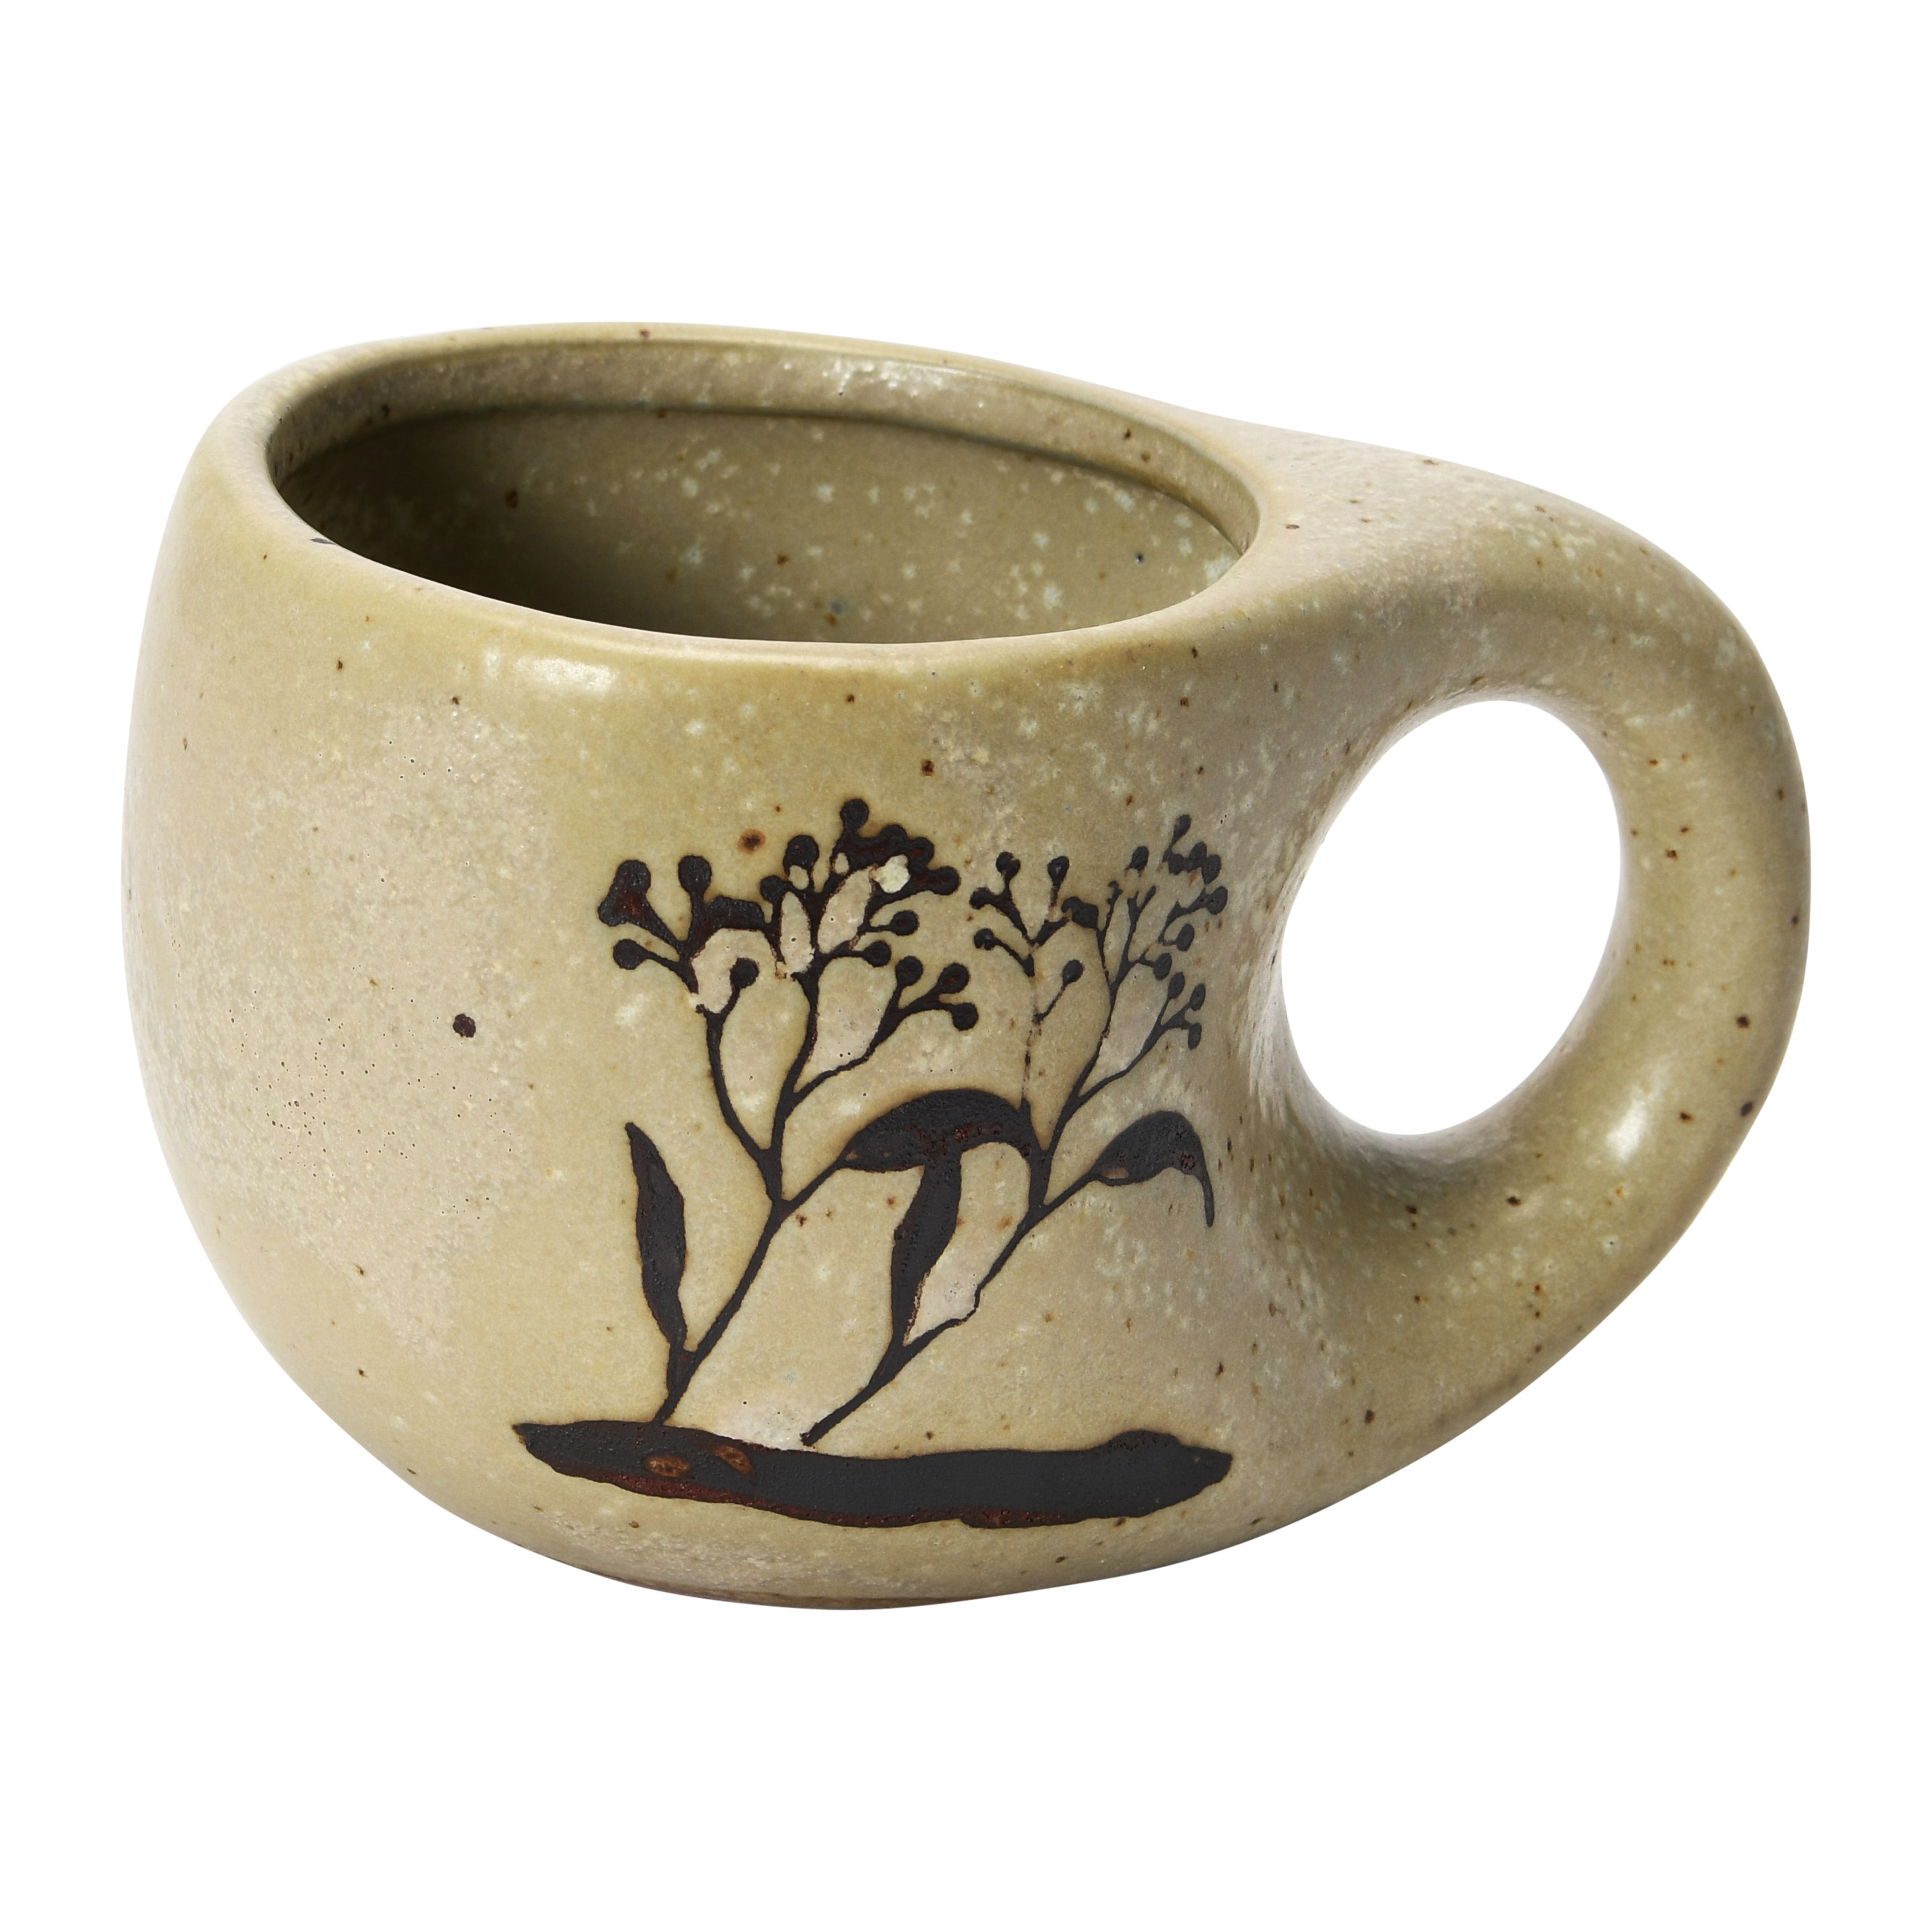  Stoneware Mug with Wax Relief Floral Image, Speckled Tan and Brown Reactive Glaze - Image 0